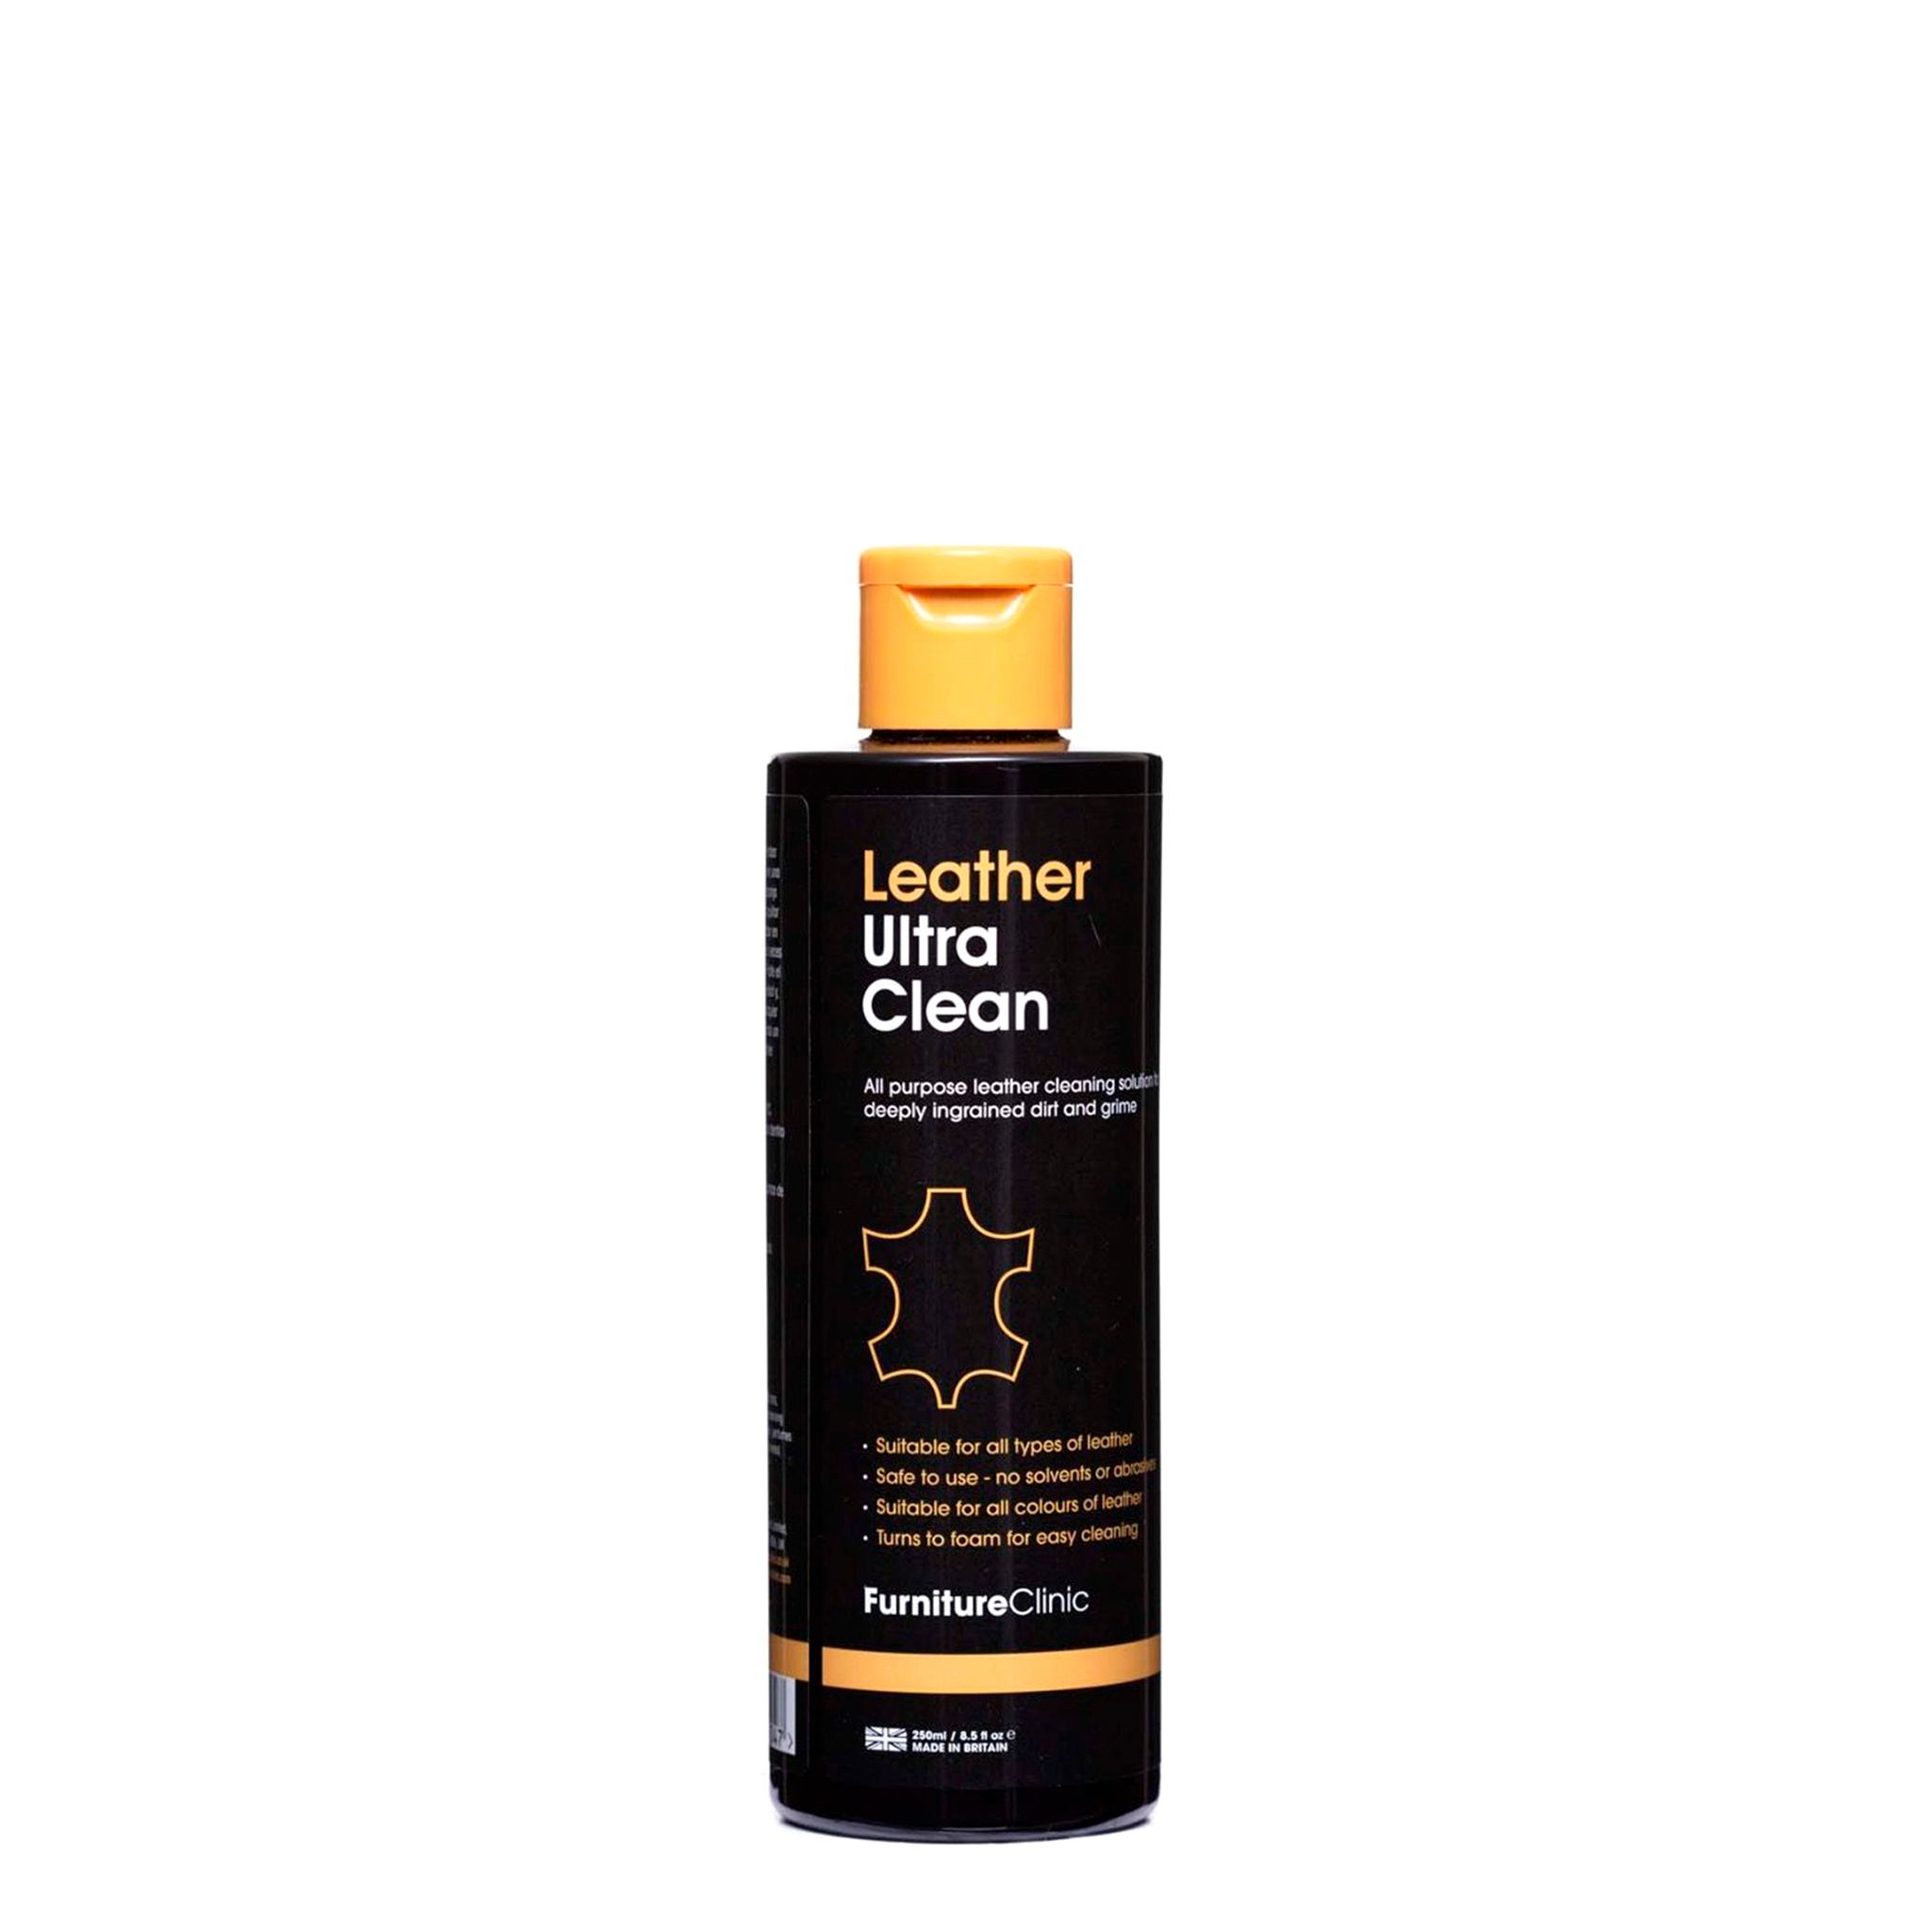 Furniture Clinic Leather Ultra Clean. Car Interior Cleaner and